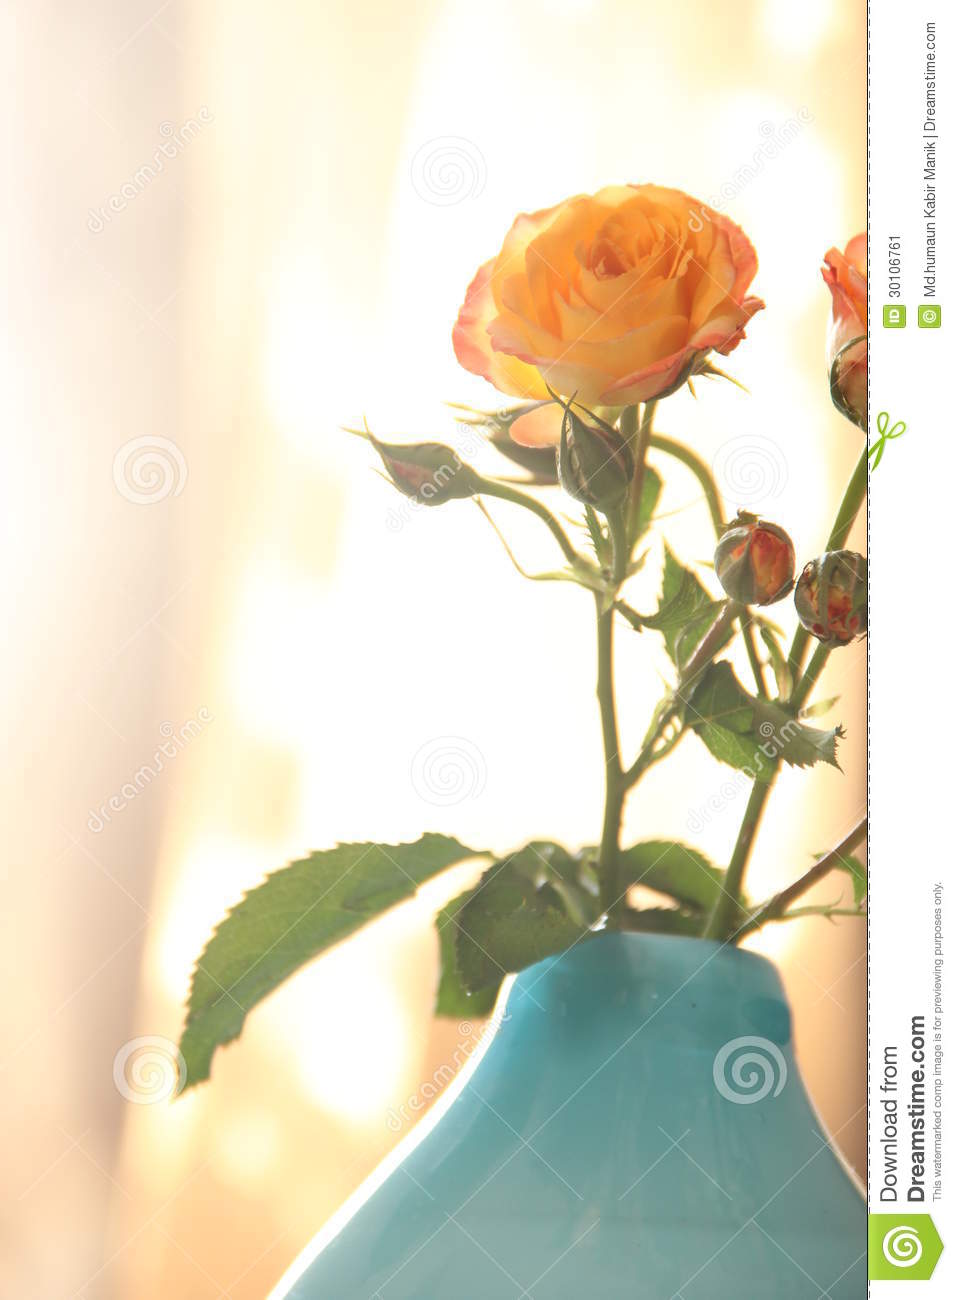 Peach Color Rose With Bud In Blue Vase Stock Image   Image  30106761